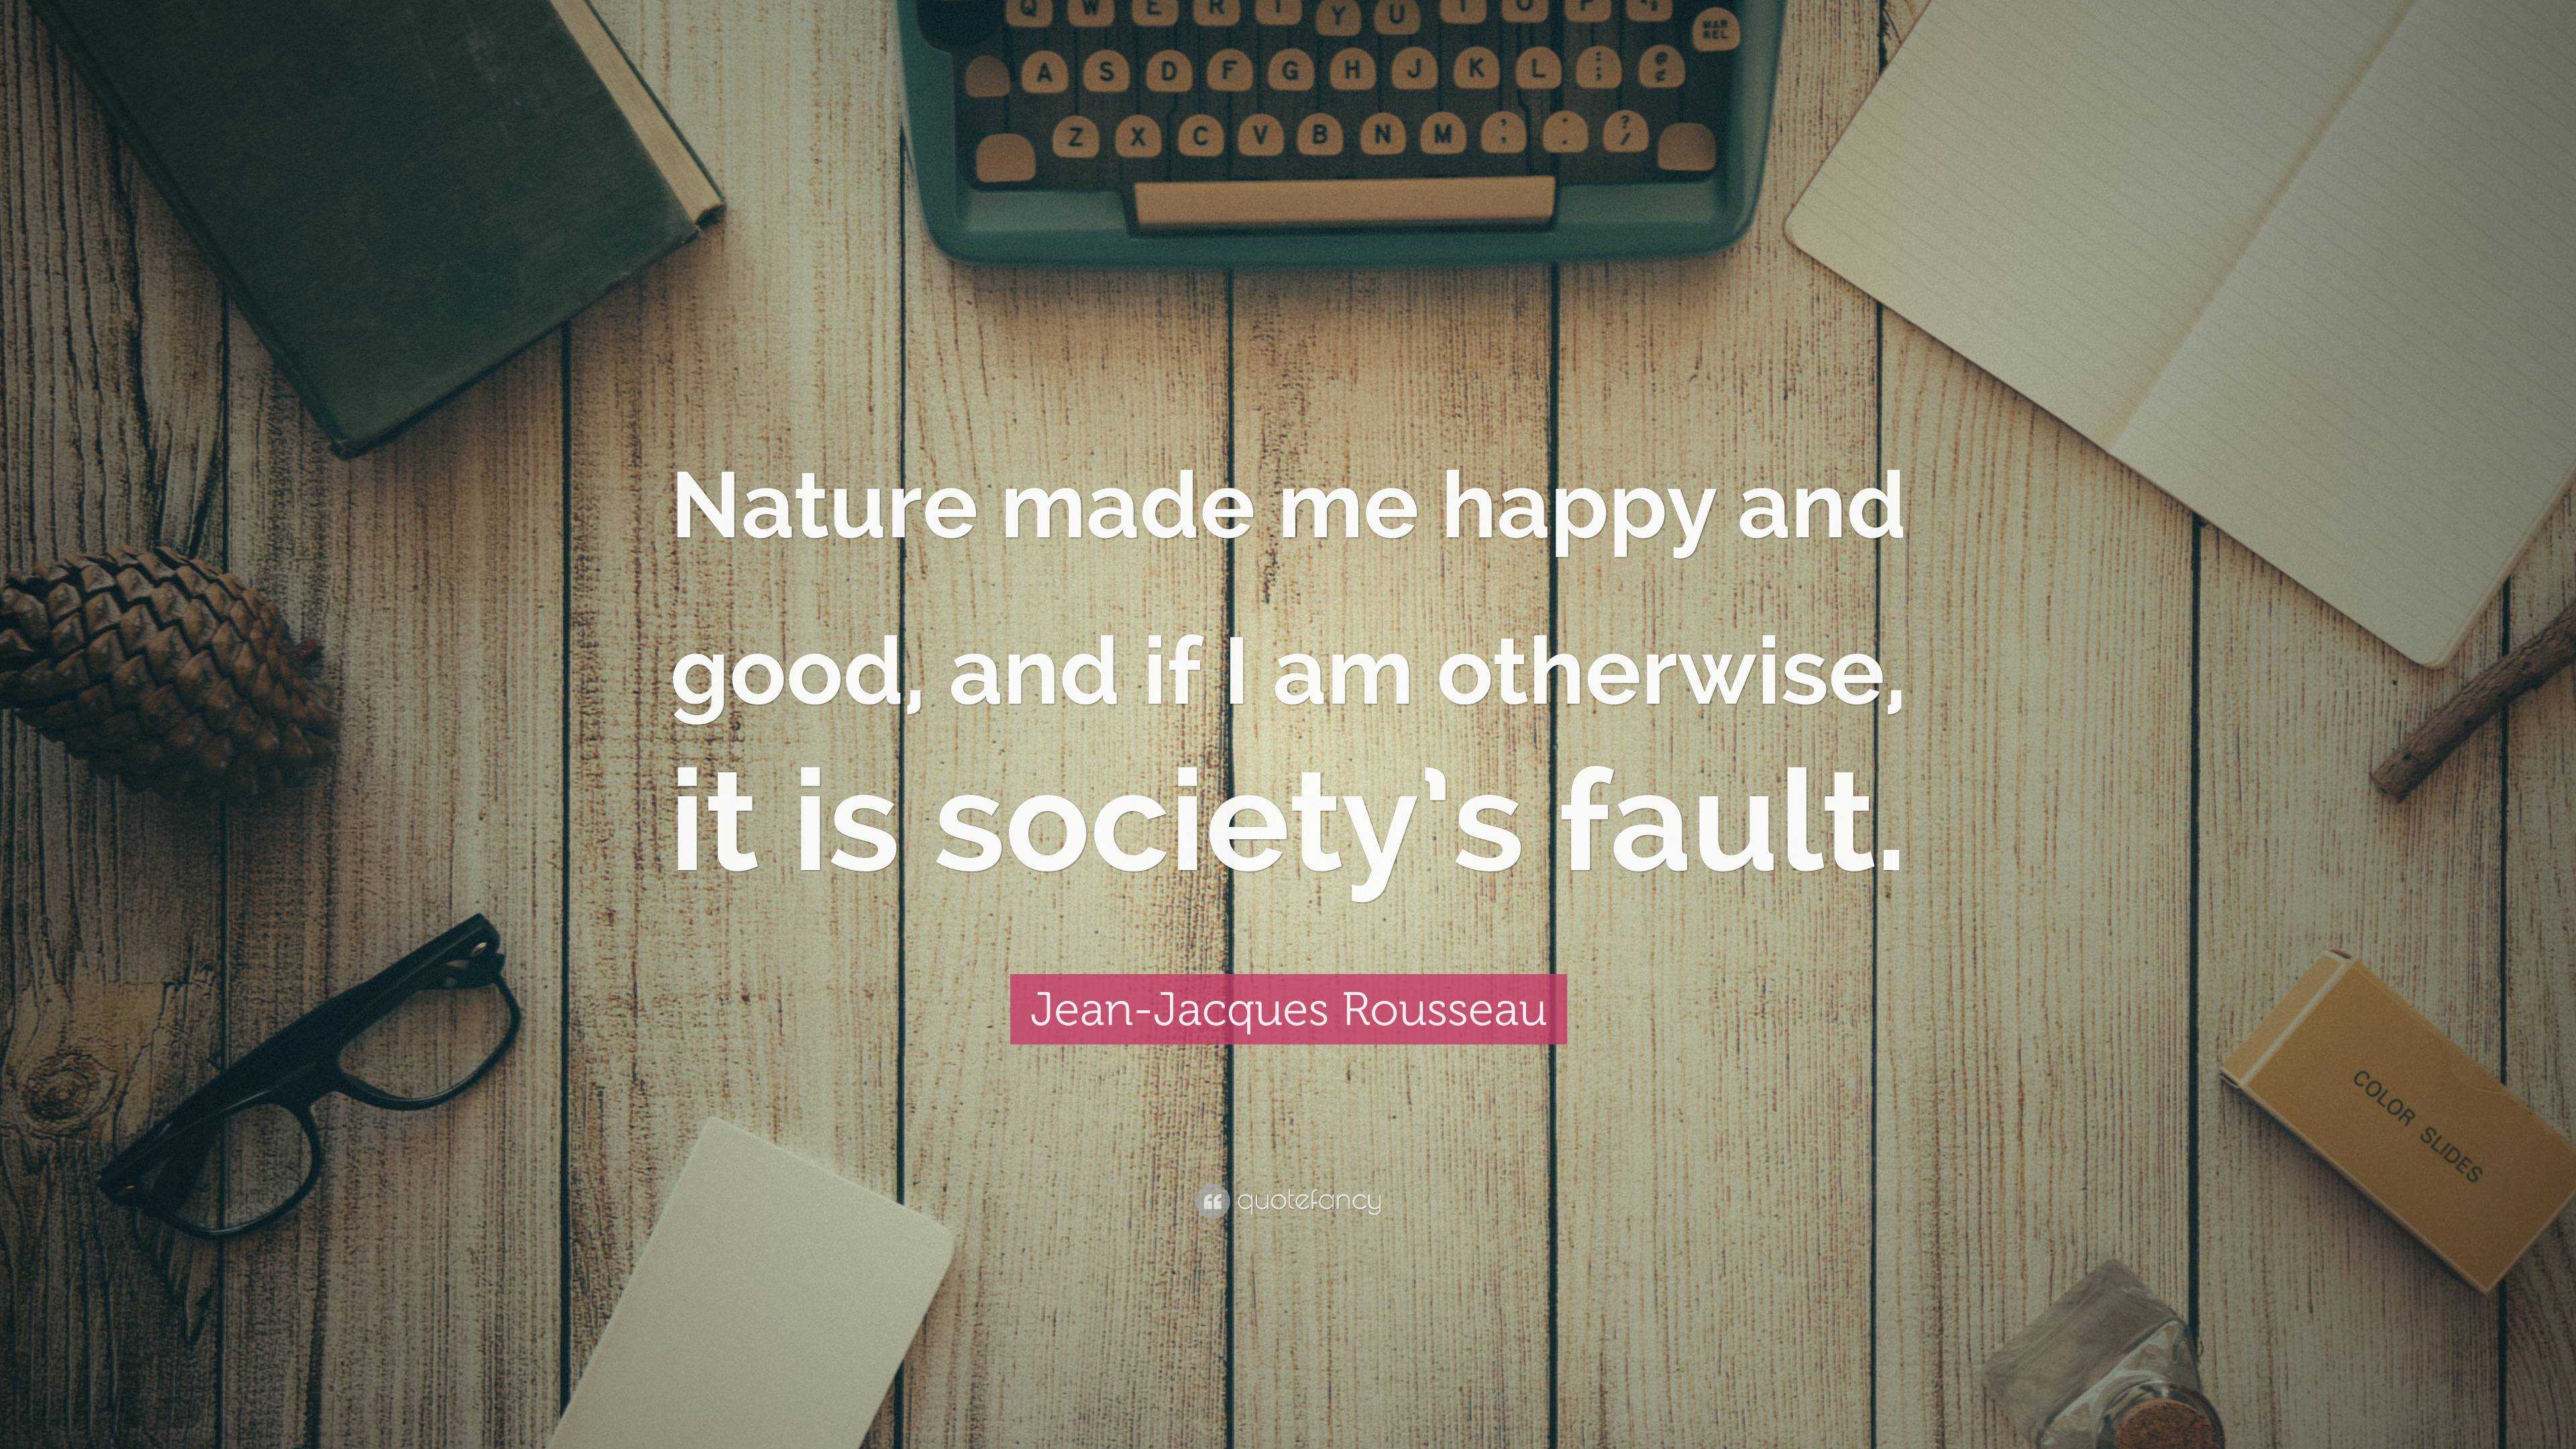 Jean-Jacques Rousseau Quote: made me happy and good, and if I am otherwise, it